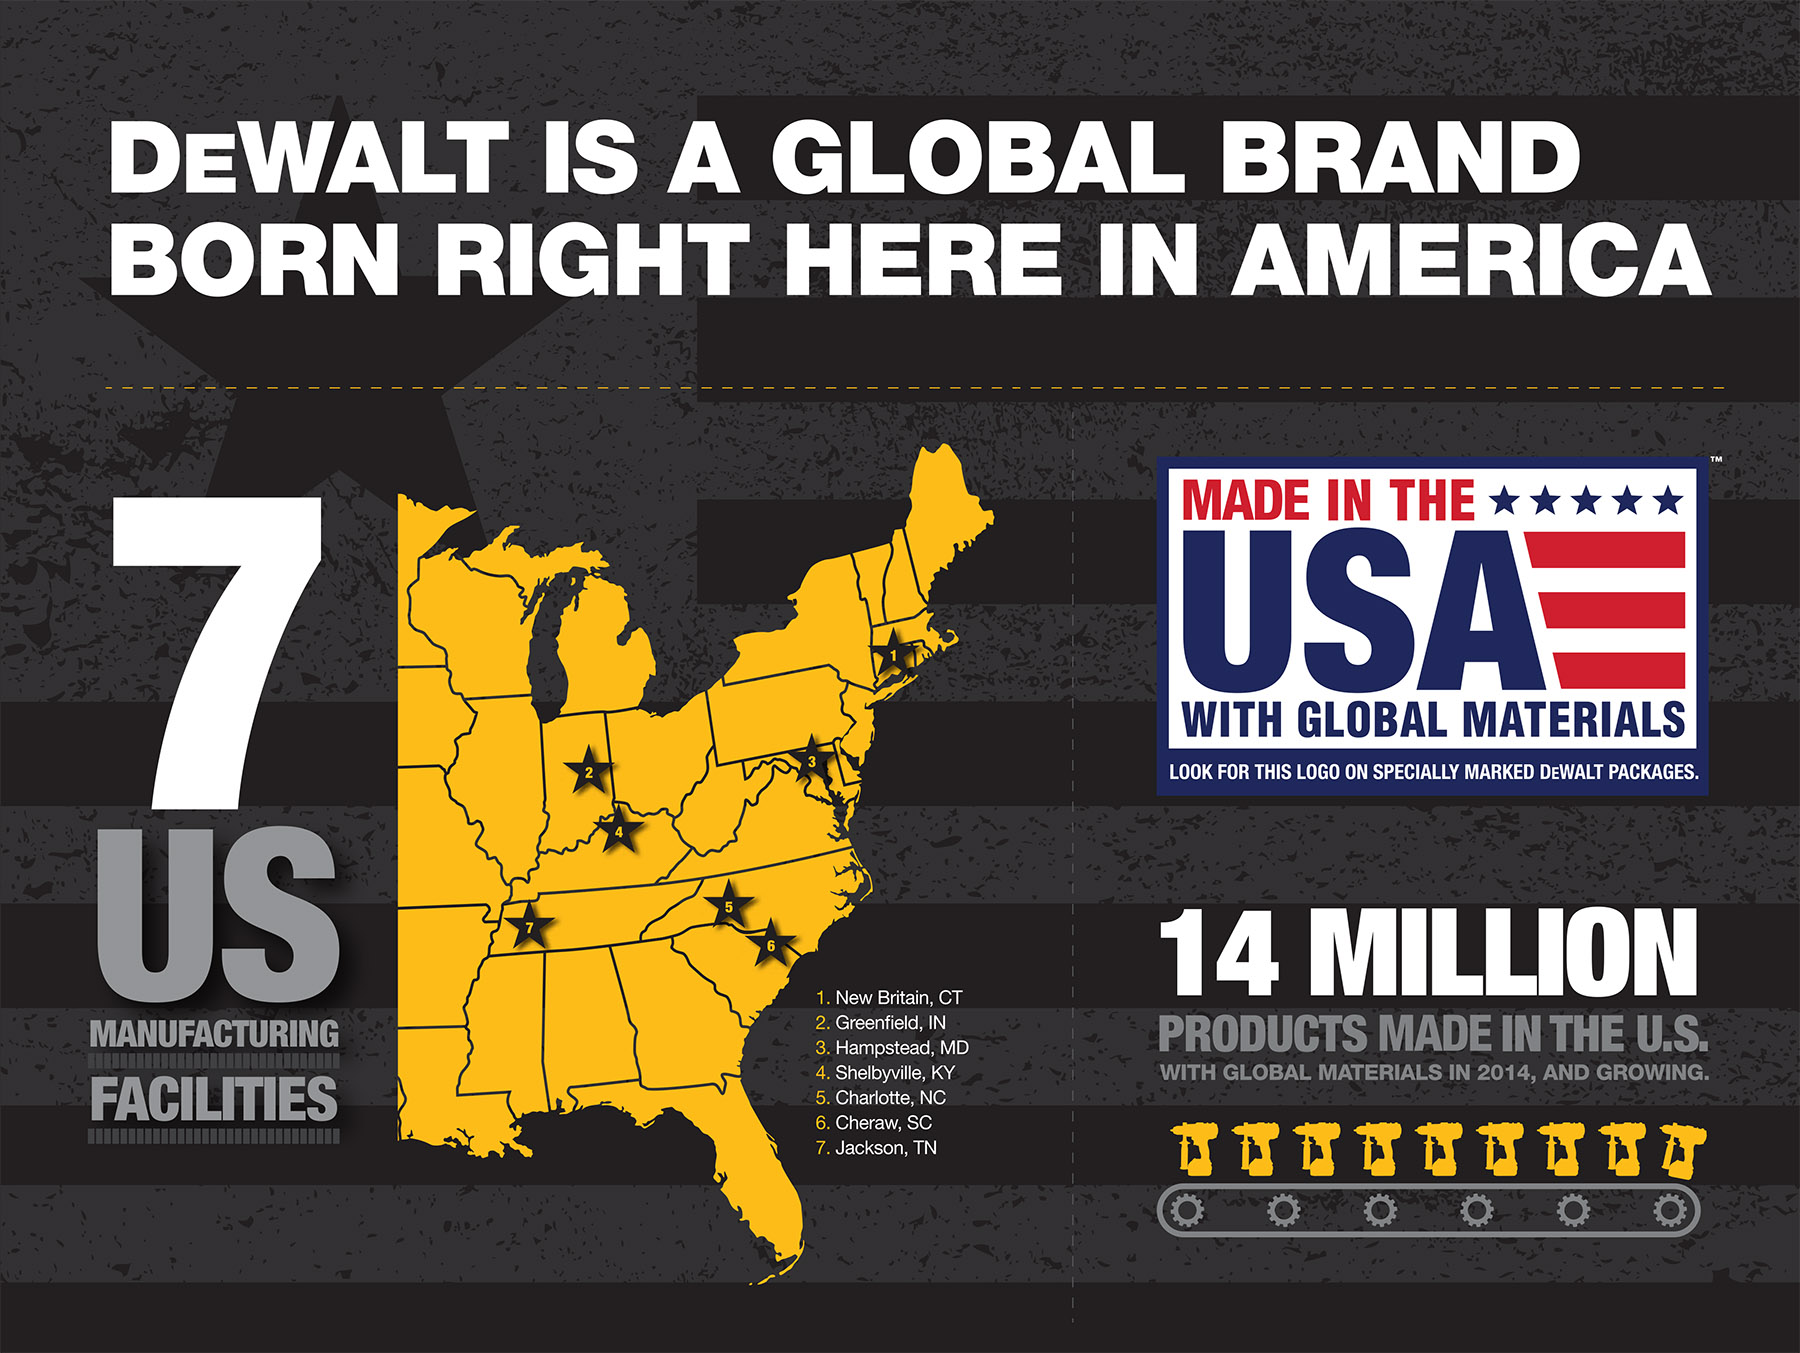 DEWALT expands its Made in the USA with Global Materials initiative